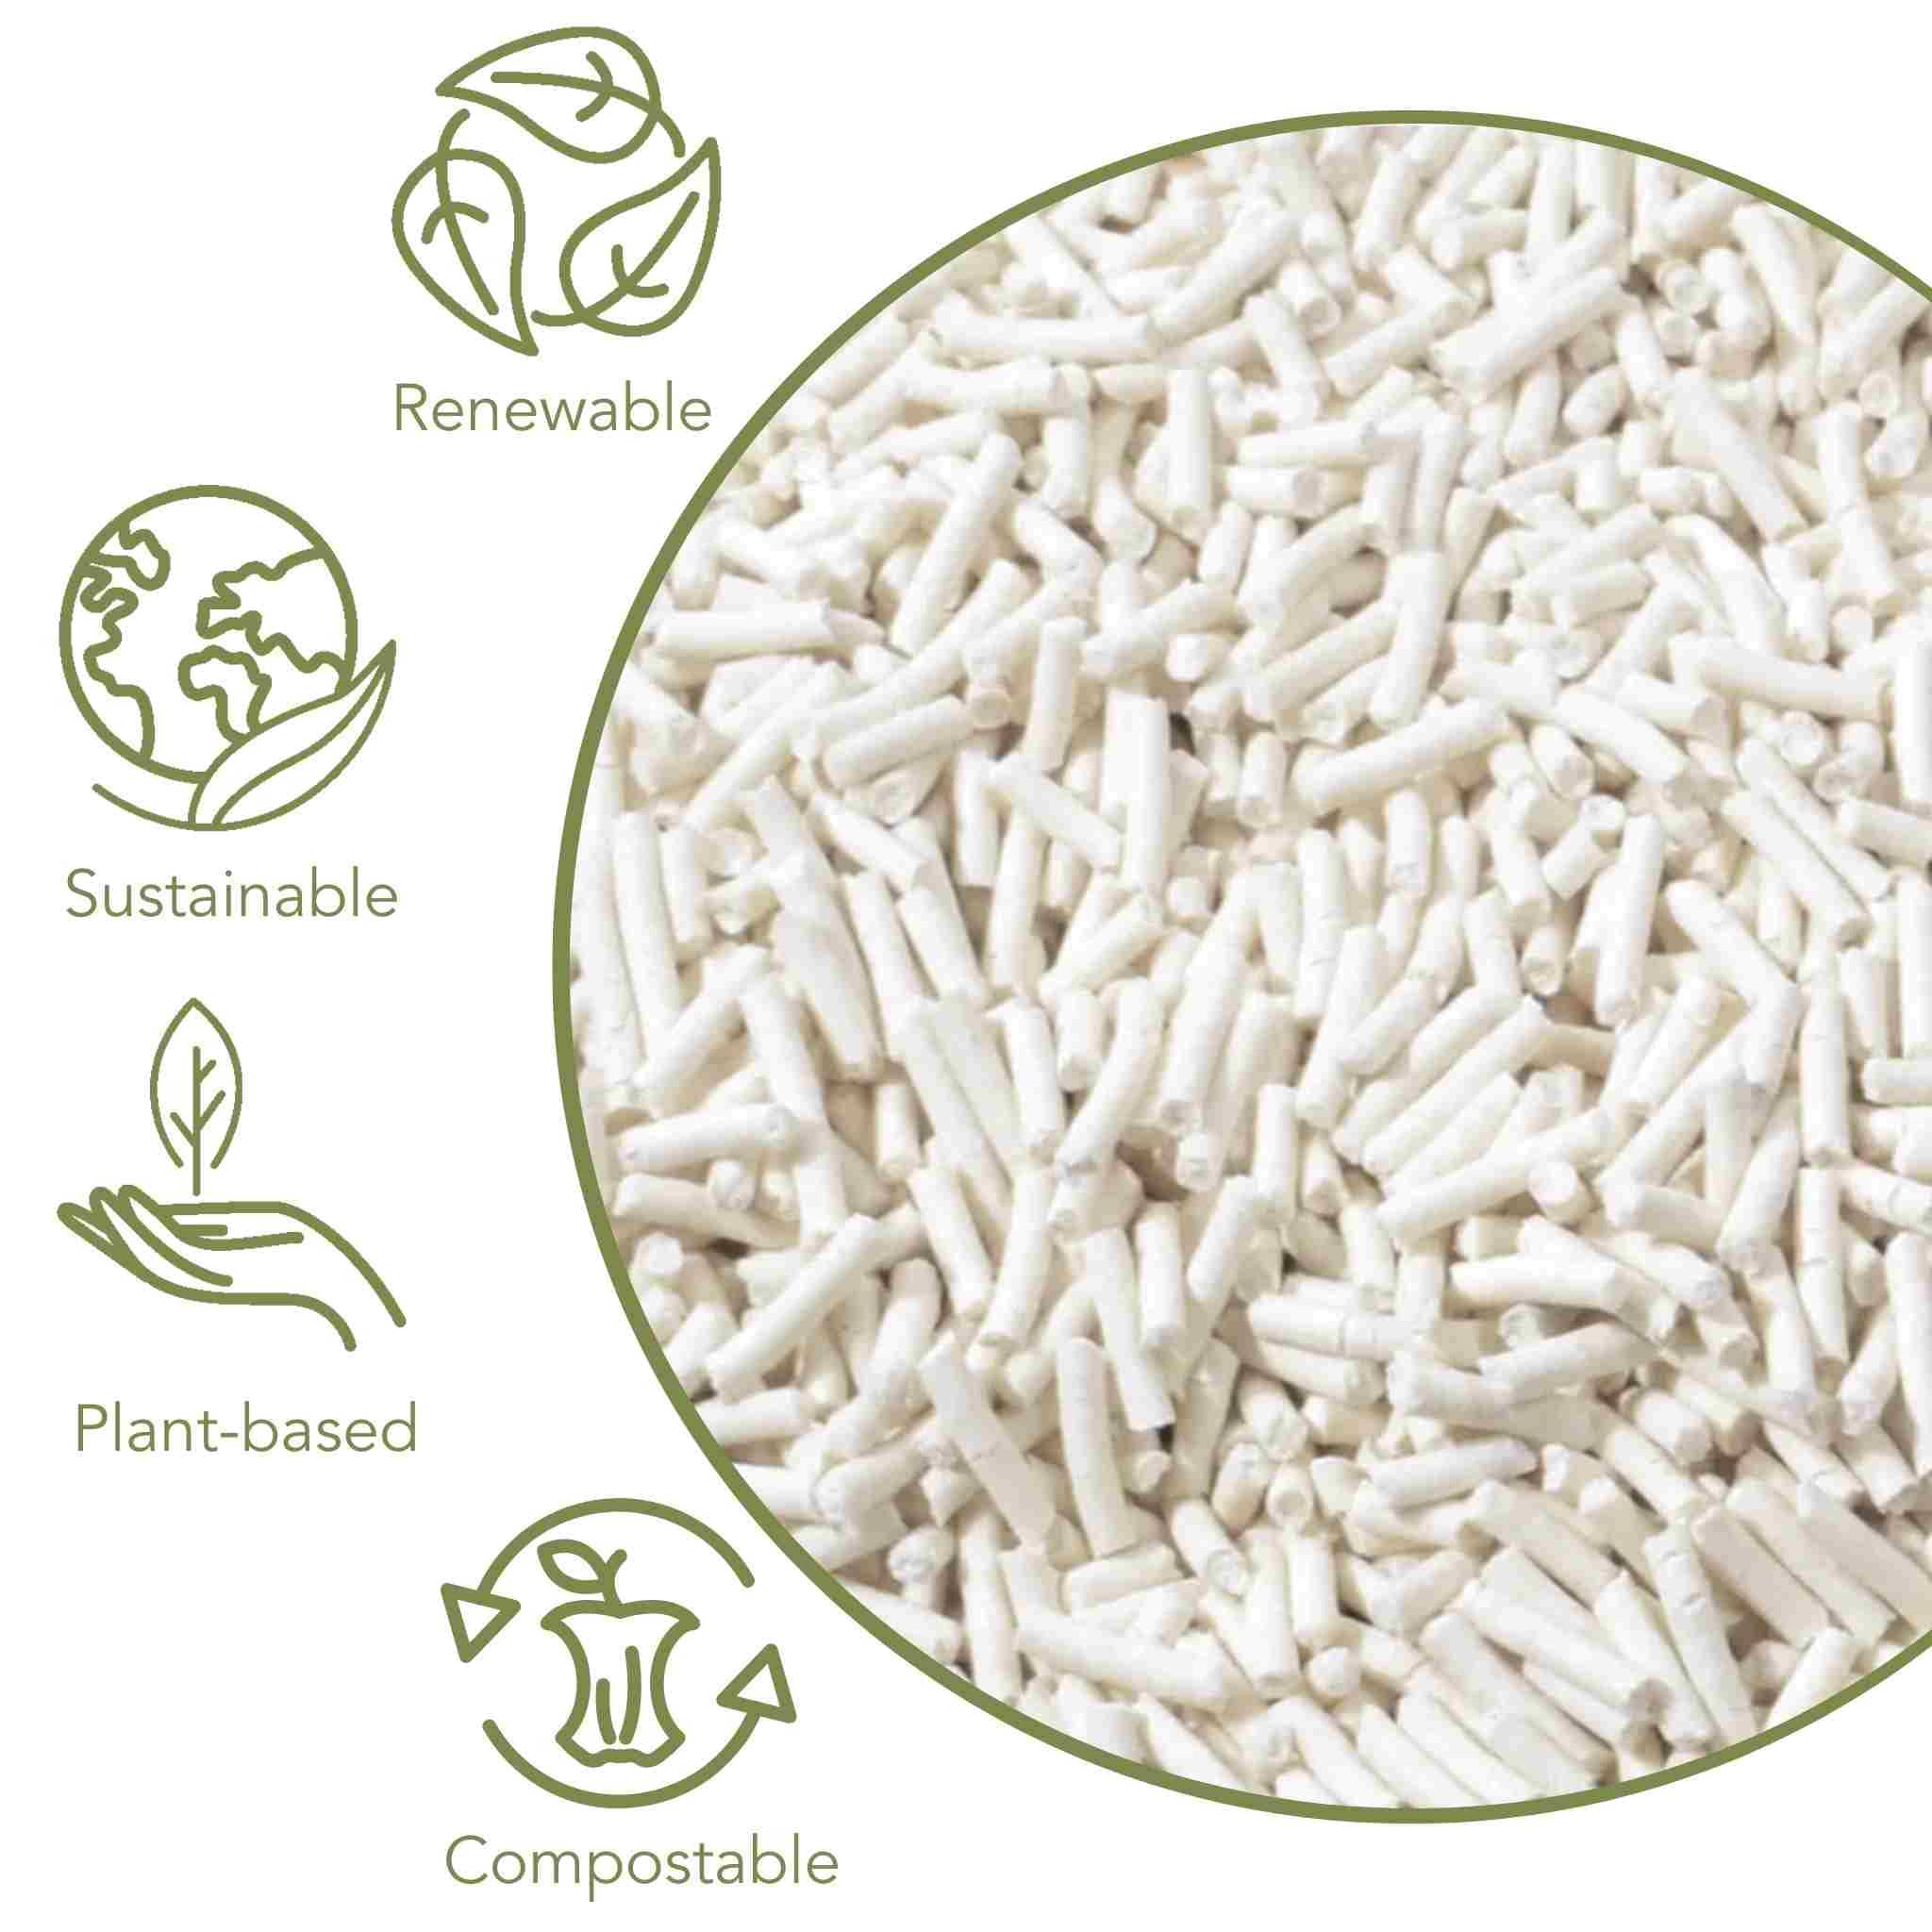 Biodegradable soybean cat litter with eco-friendly icons indicating renewable, sustainable, plant-based, and compostable properties.